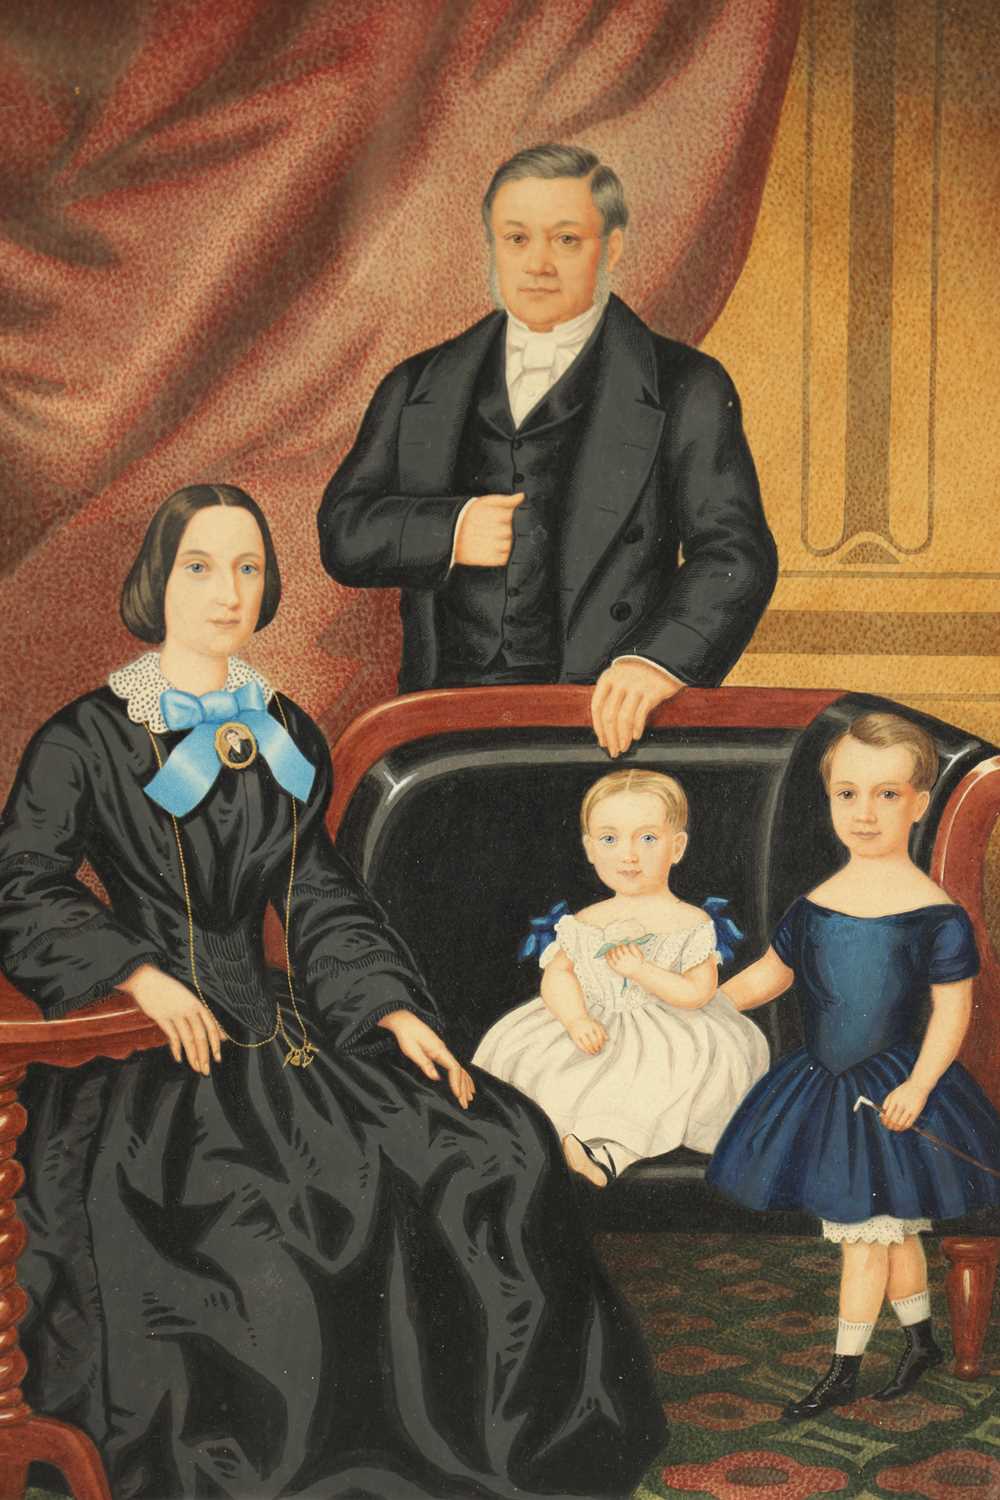 A 19TH CENTURY WATER COLOUR DEPICTING A FAMILY PORTRAIT - Image 3 of 7